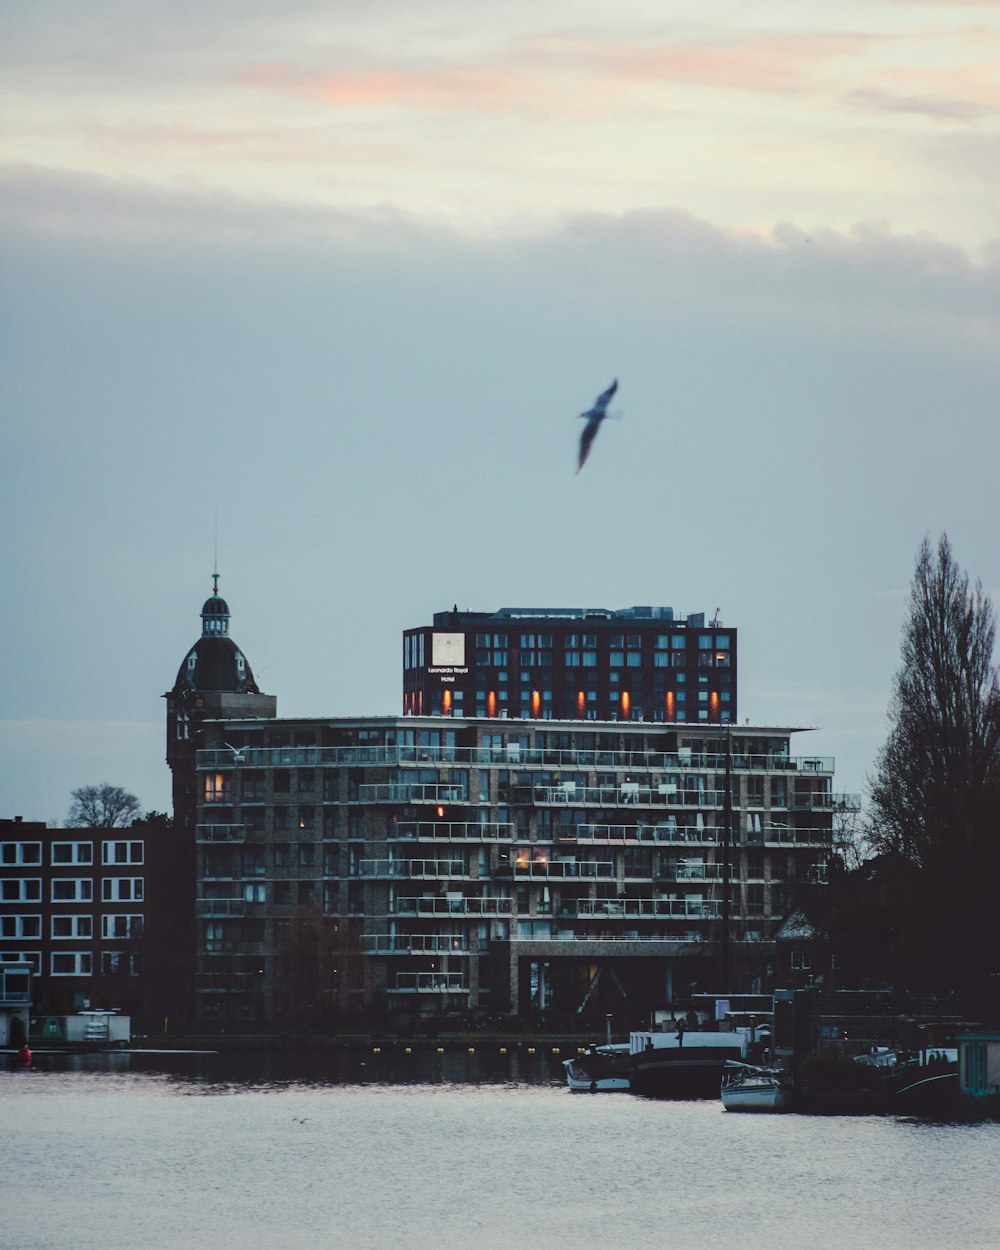 a bird flying over a large building next to a body of water